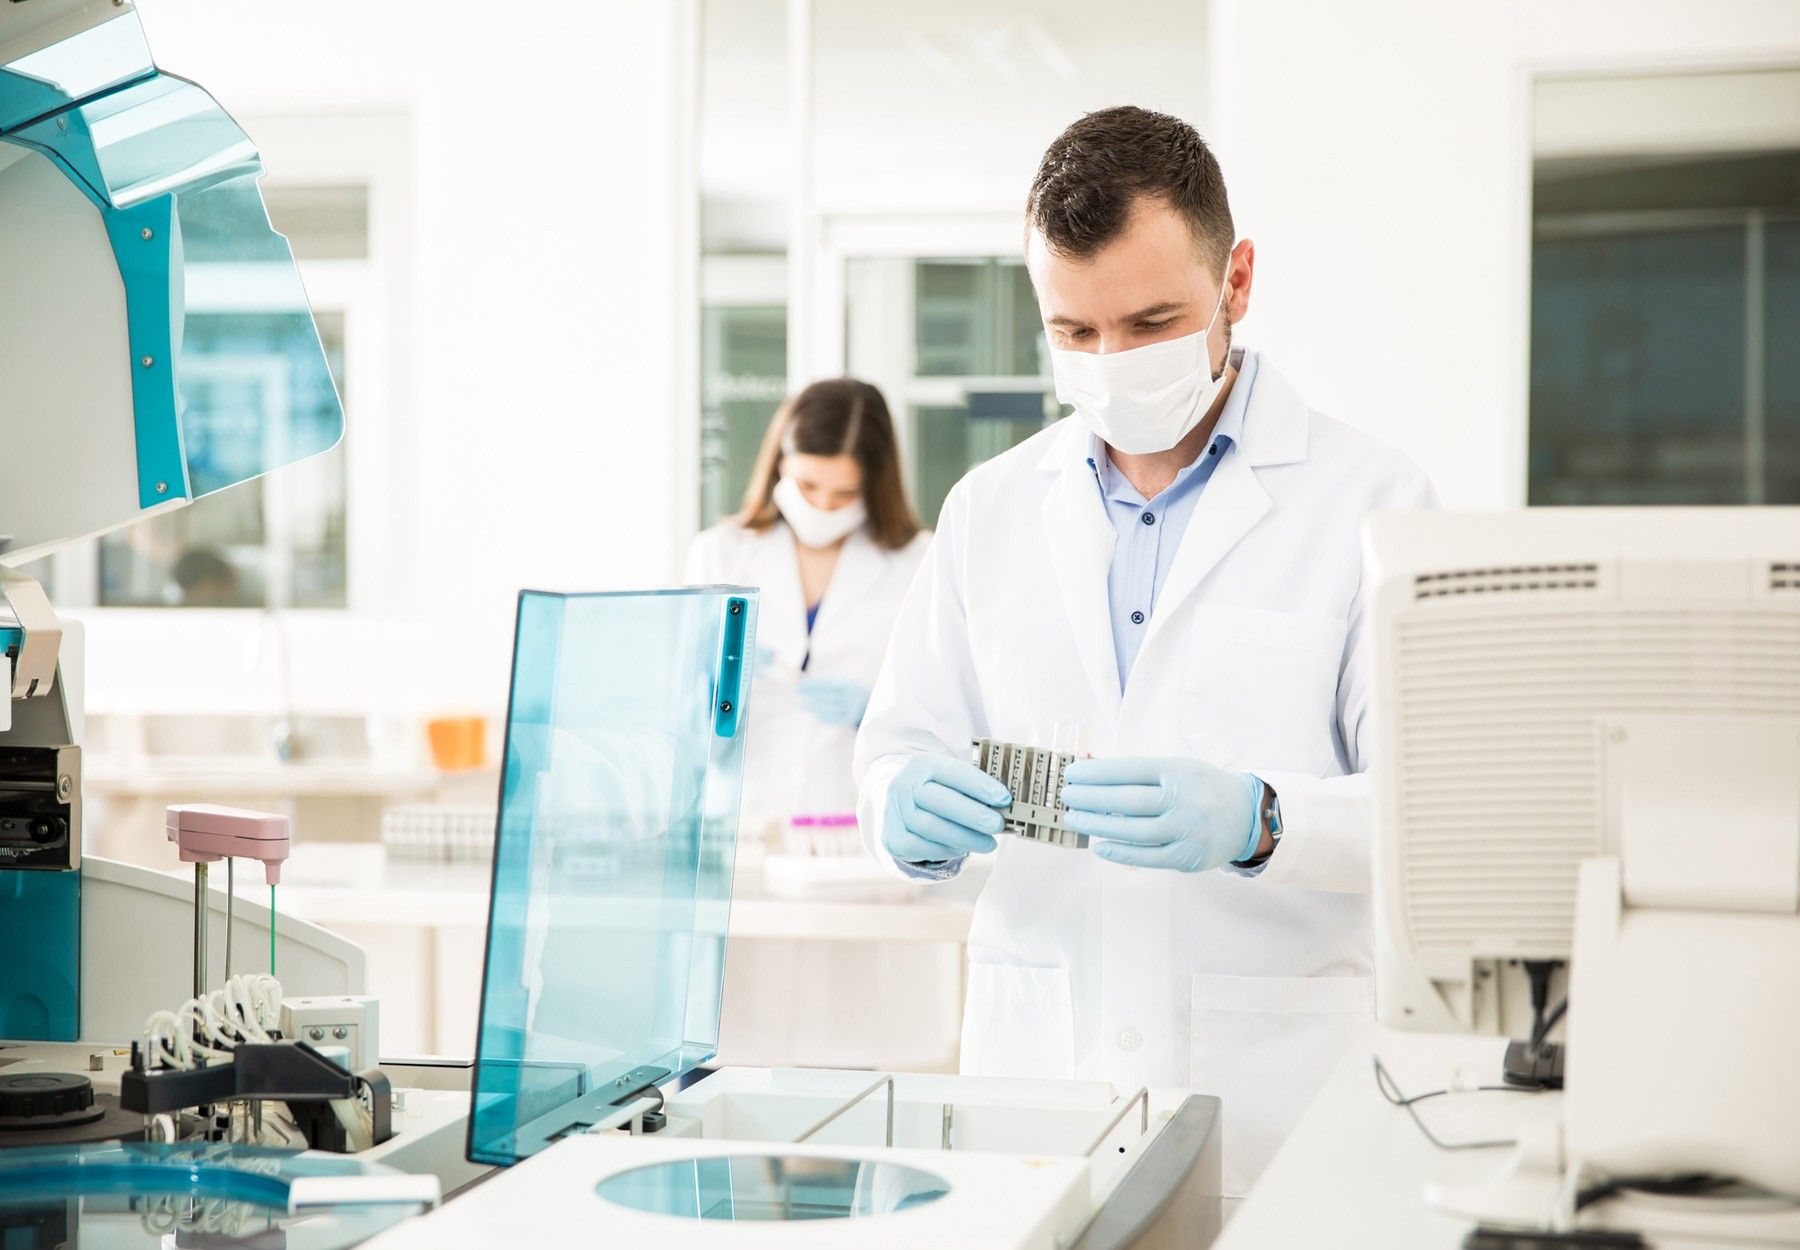 A male worker using an instrument in the lab with a female worker in the background stock image